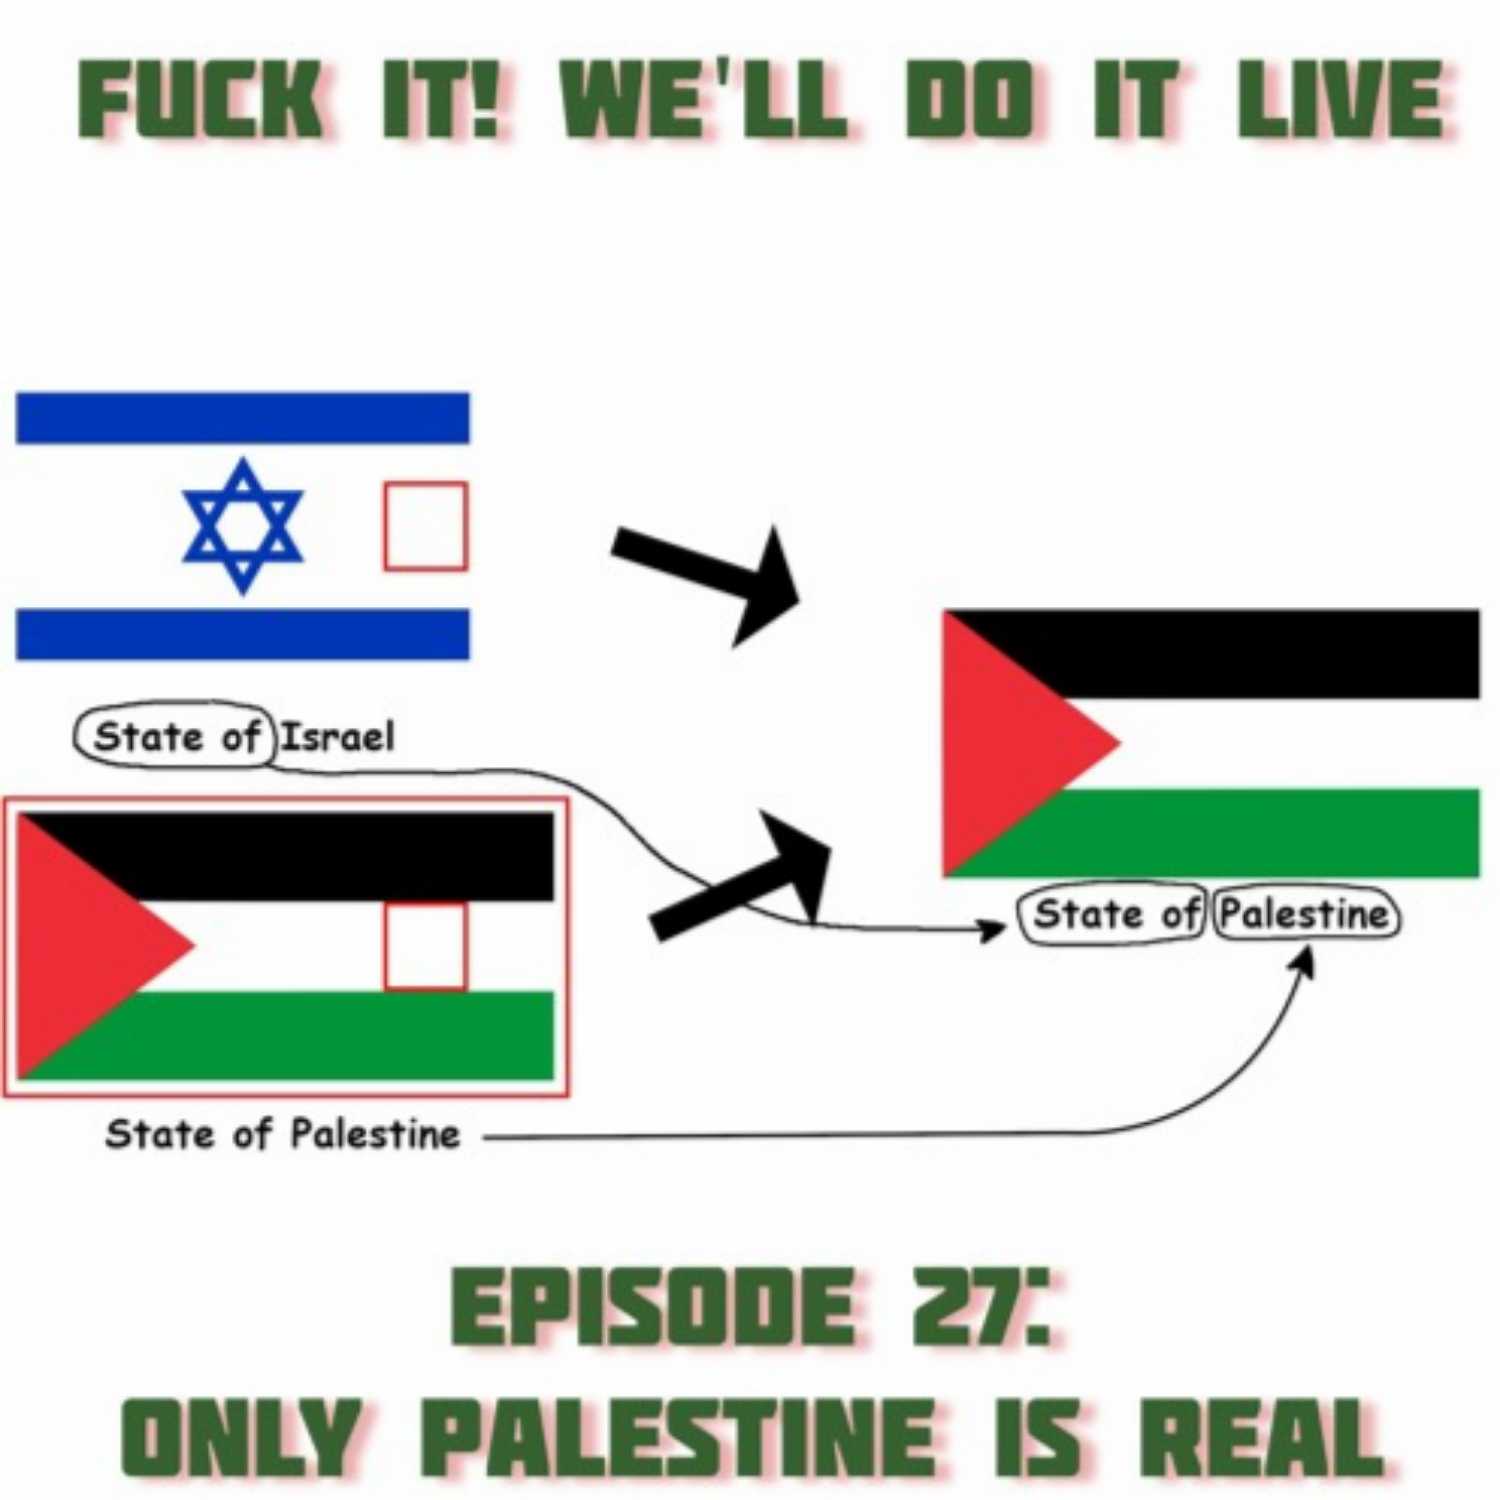 Fμck It, We'll Do it Live! Episode 27: Only Palestine Is Real